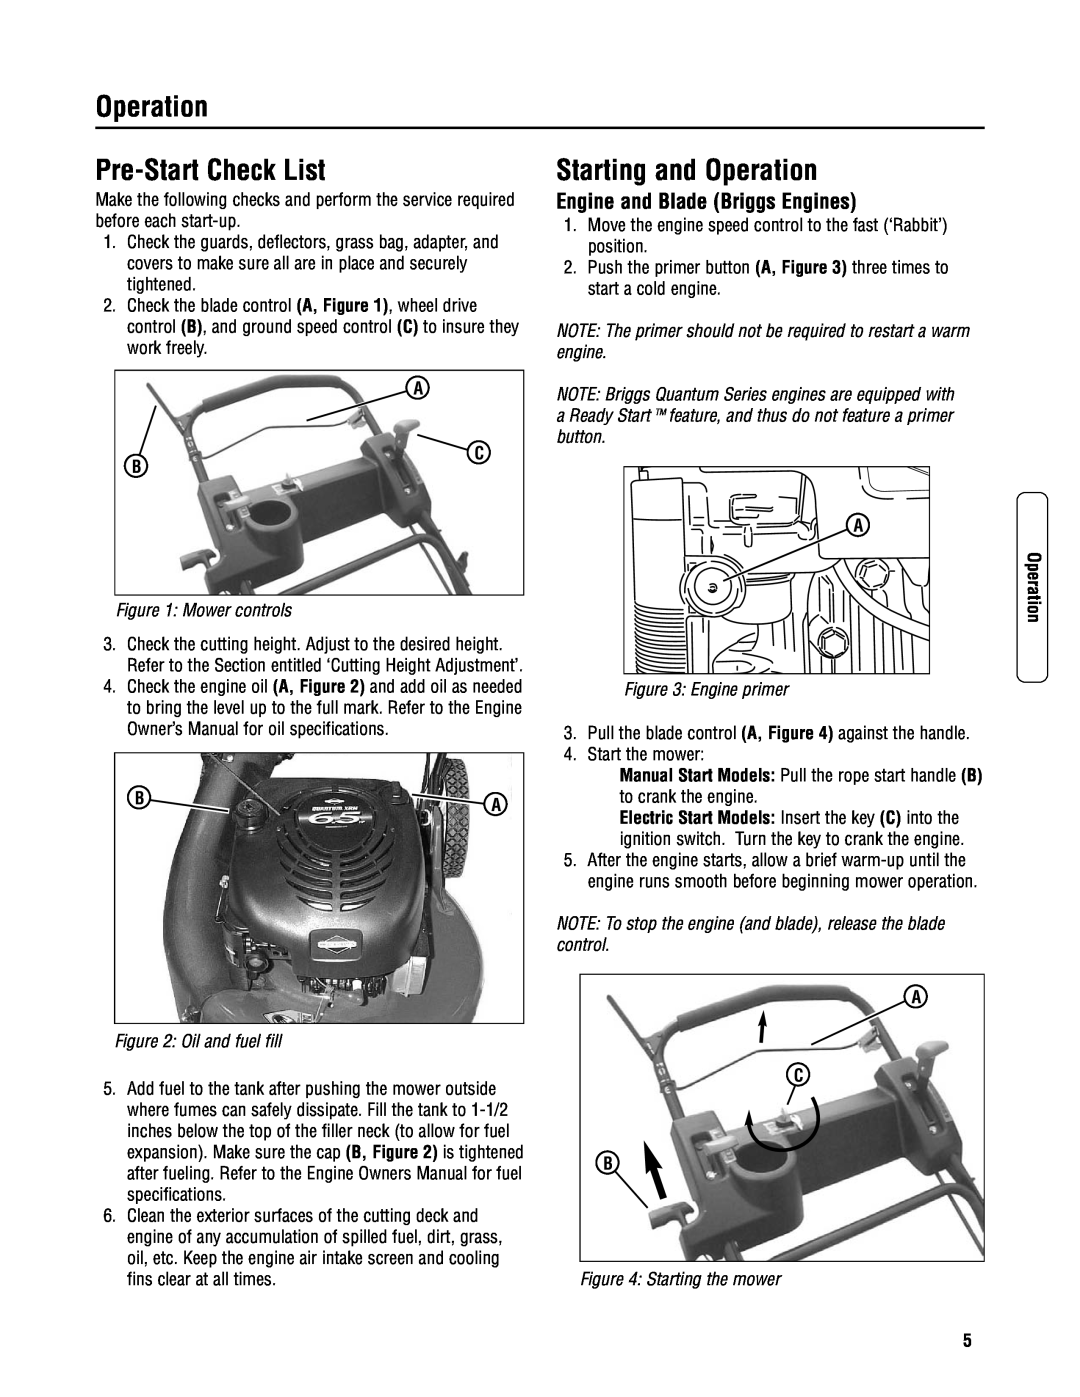 Snapper 2167519B Pre-Start Check List, Starting and Operation, Engine and Blade Briggs Engines, Mower controls 